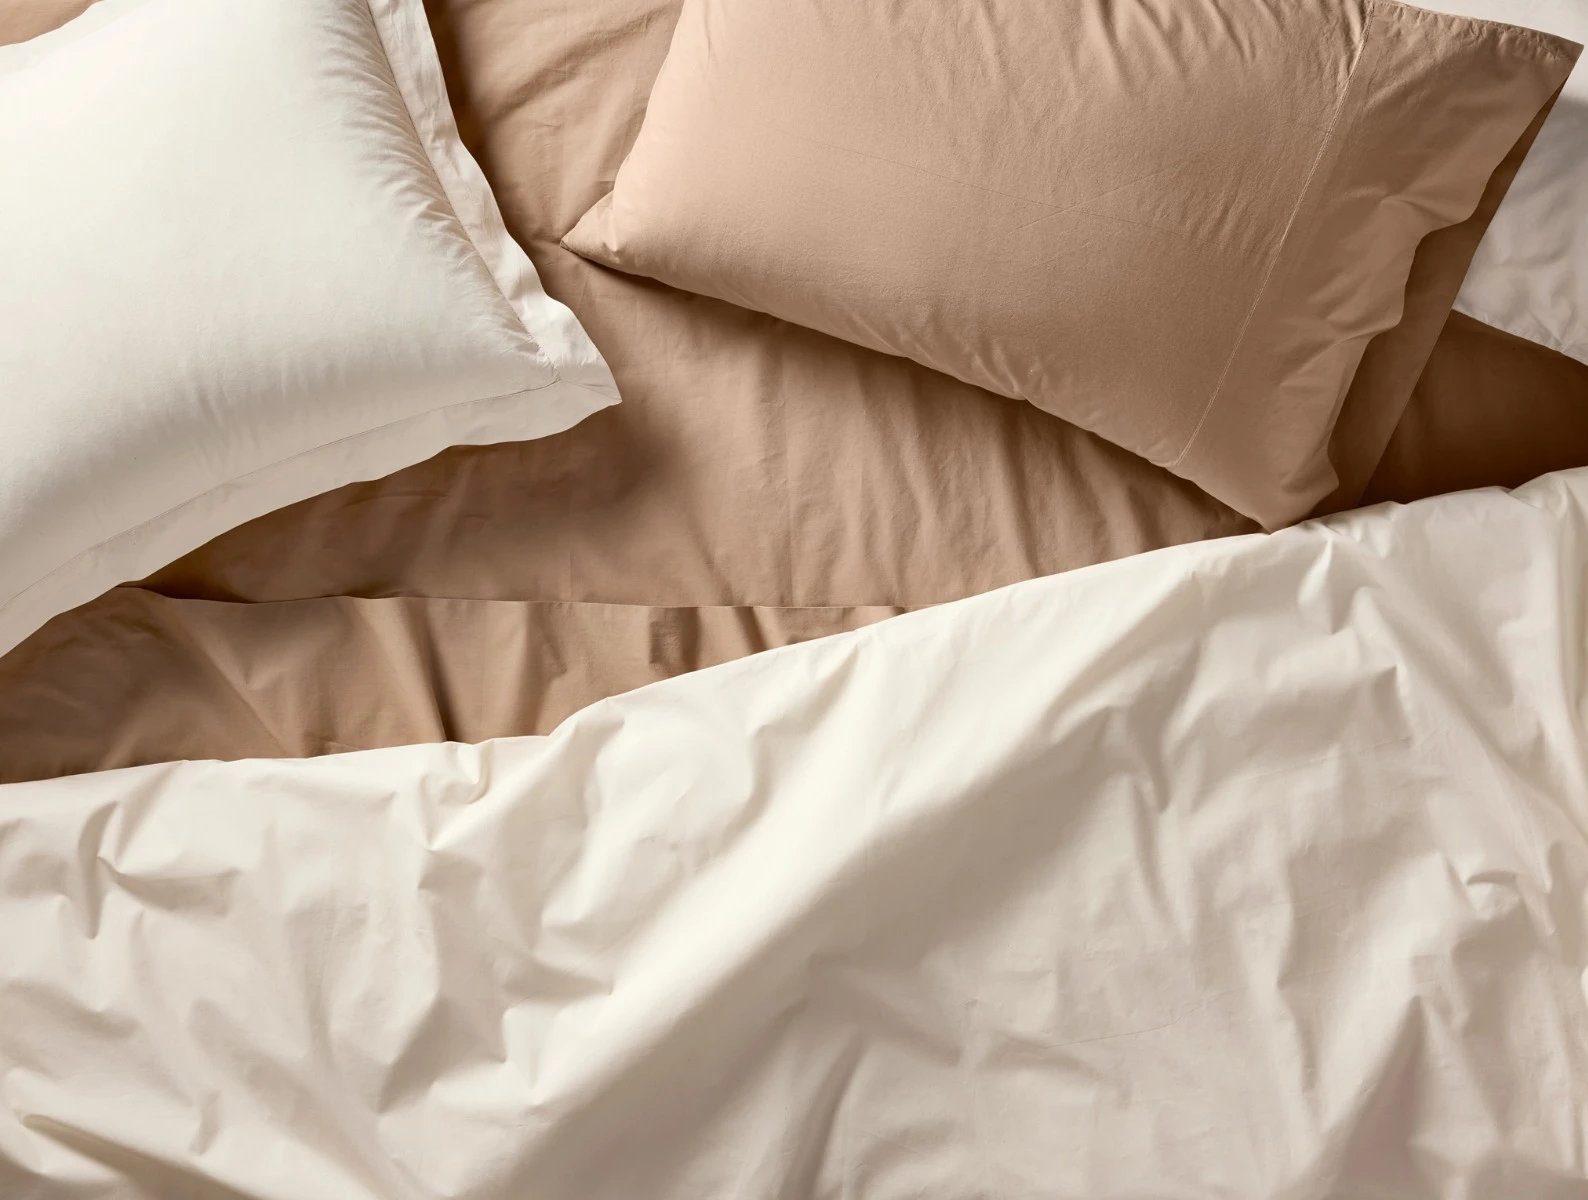 Classic Percale Pillowcases, Pillow Covers